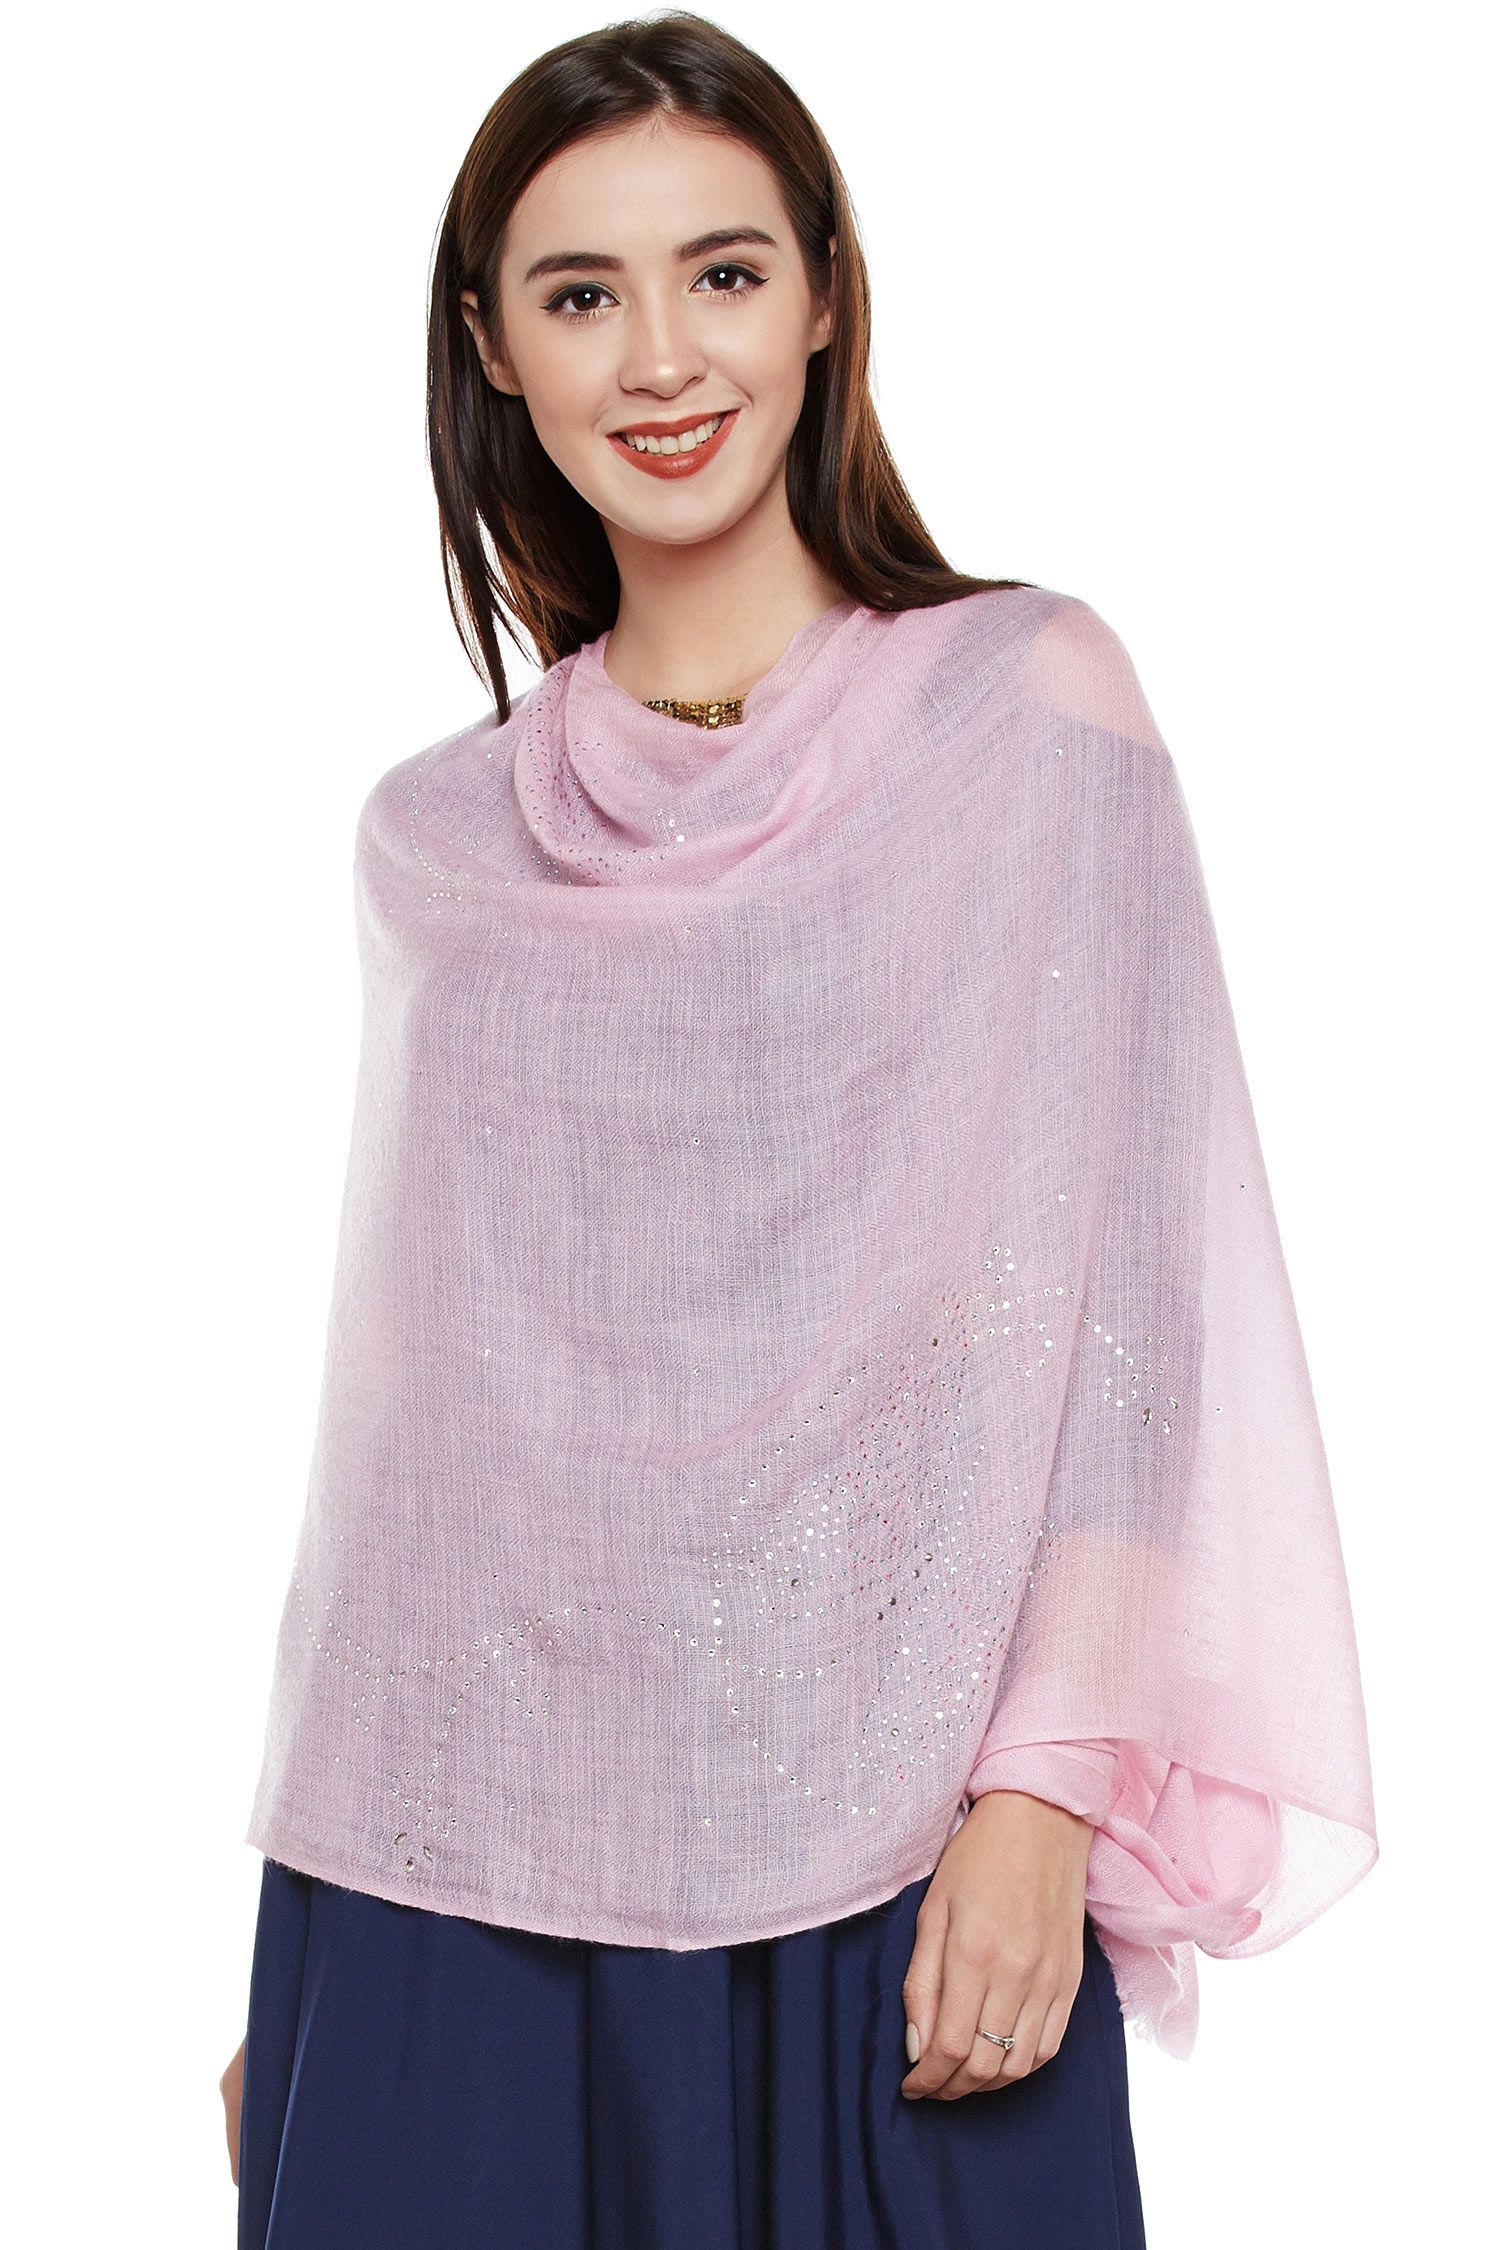 Baby Pink Song Of The Butterfly Swarovski Cashmere Scarf | Pure Pashmina